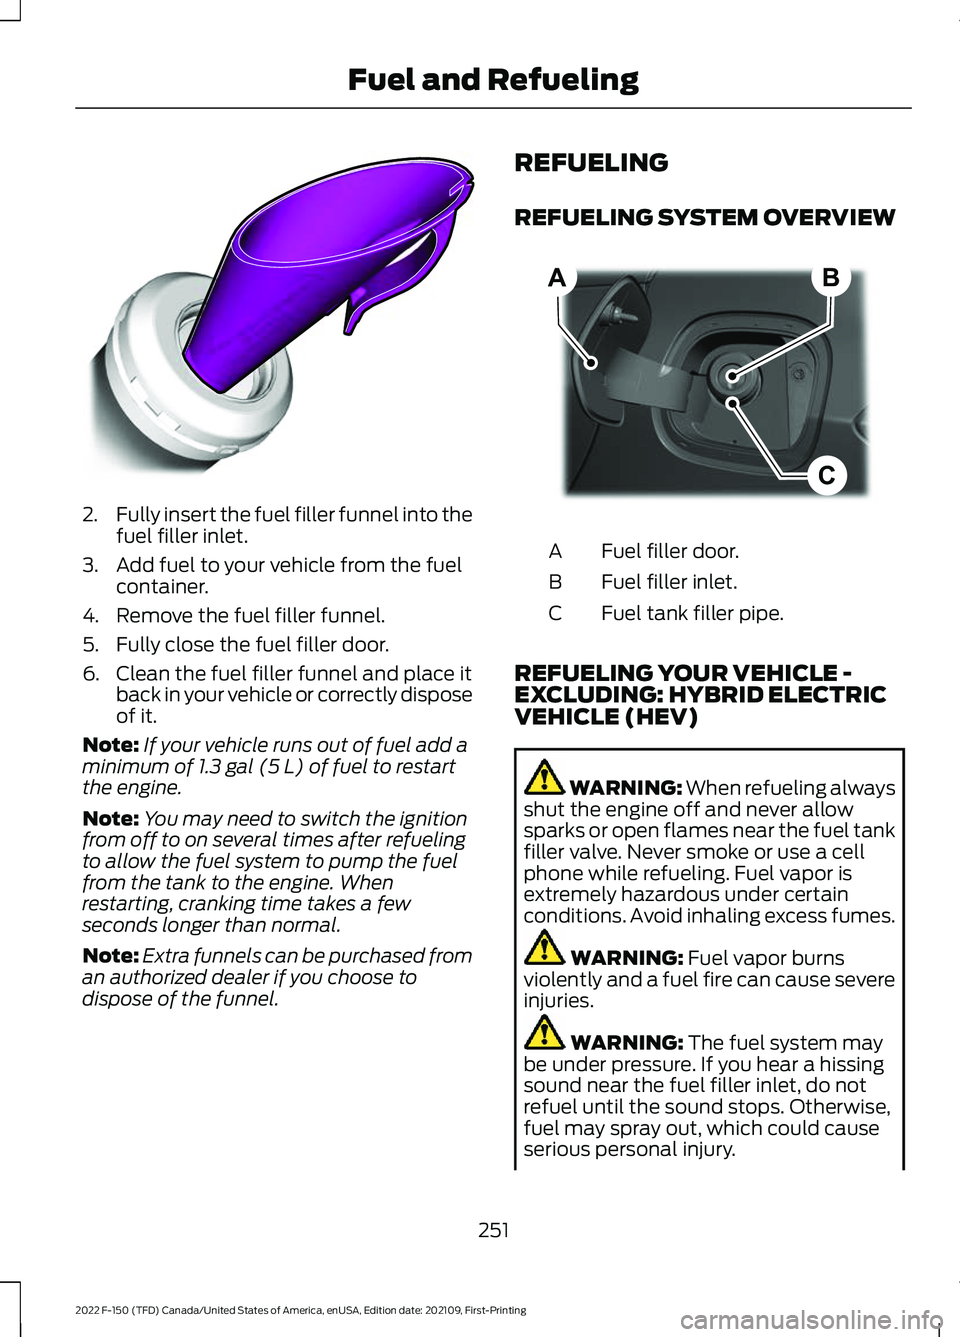 FORD F-150 2022  Owners Manual 2.
Fully insert the fuel filler funnel into the
fuel filler inlet.
3. Add fuel to your vehicle from the fuel container.
4. Remove the fuel filler funnel.
5. Fully close the fuel filler door.
6. Clean 